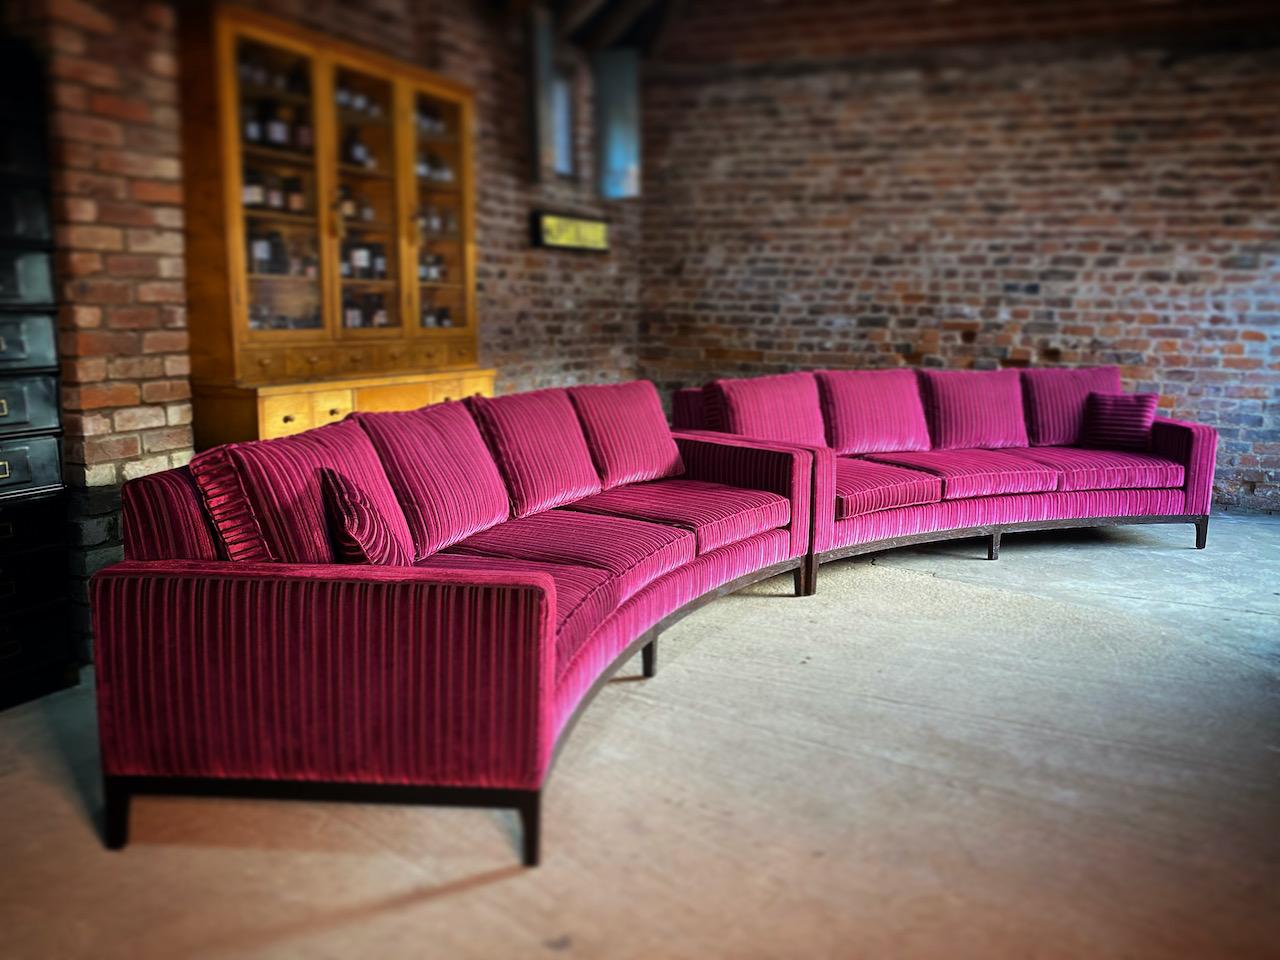 The best of the best, exceptional pair of sumptuous custom made Rosewood curved three seater sofas of the highest quality, standing at over 10 feet in length per sofa ( combined 20 feet in total) upholstered in the most luxurious magenta velvet with